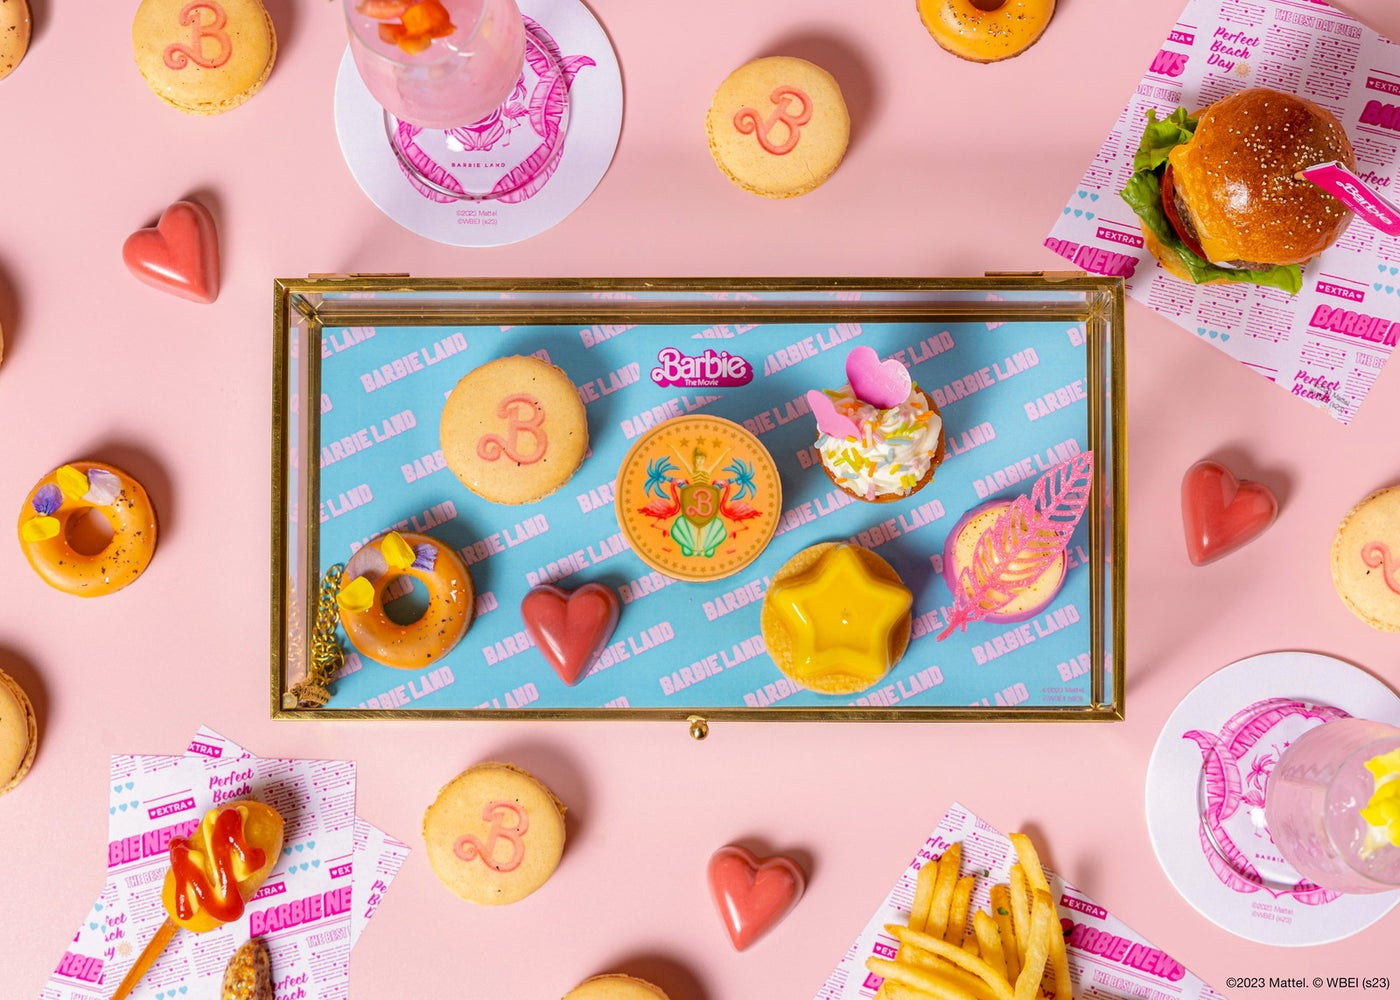 Barbie The Movie Cafe「Sweets Box」（イメージ）／提供画像